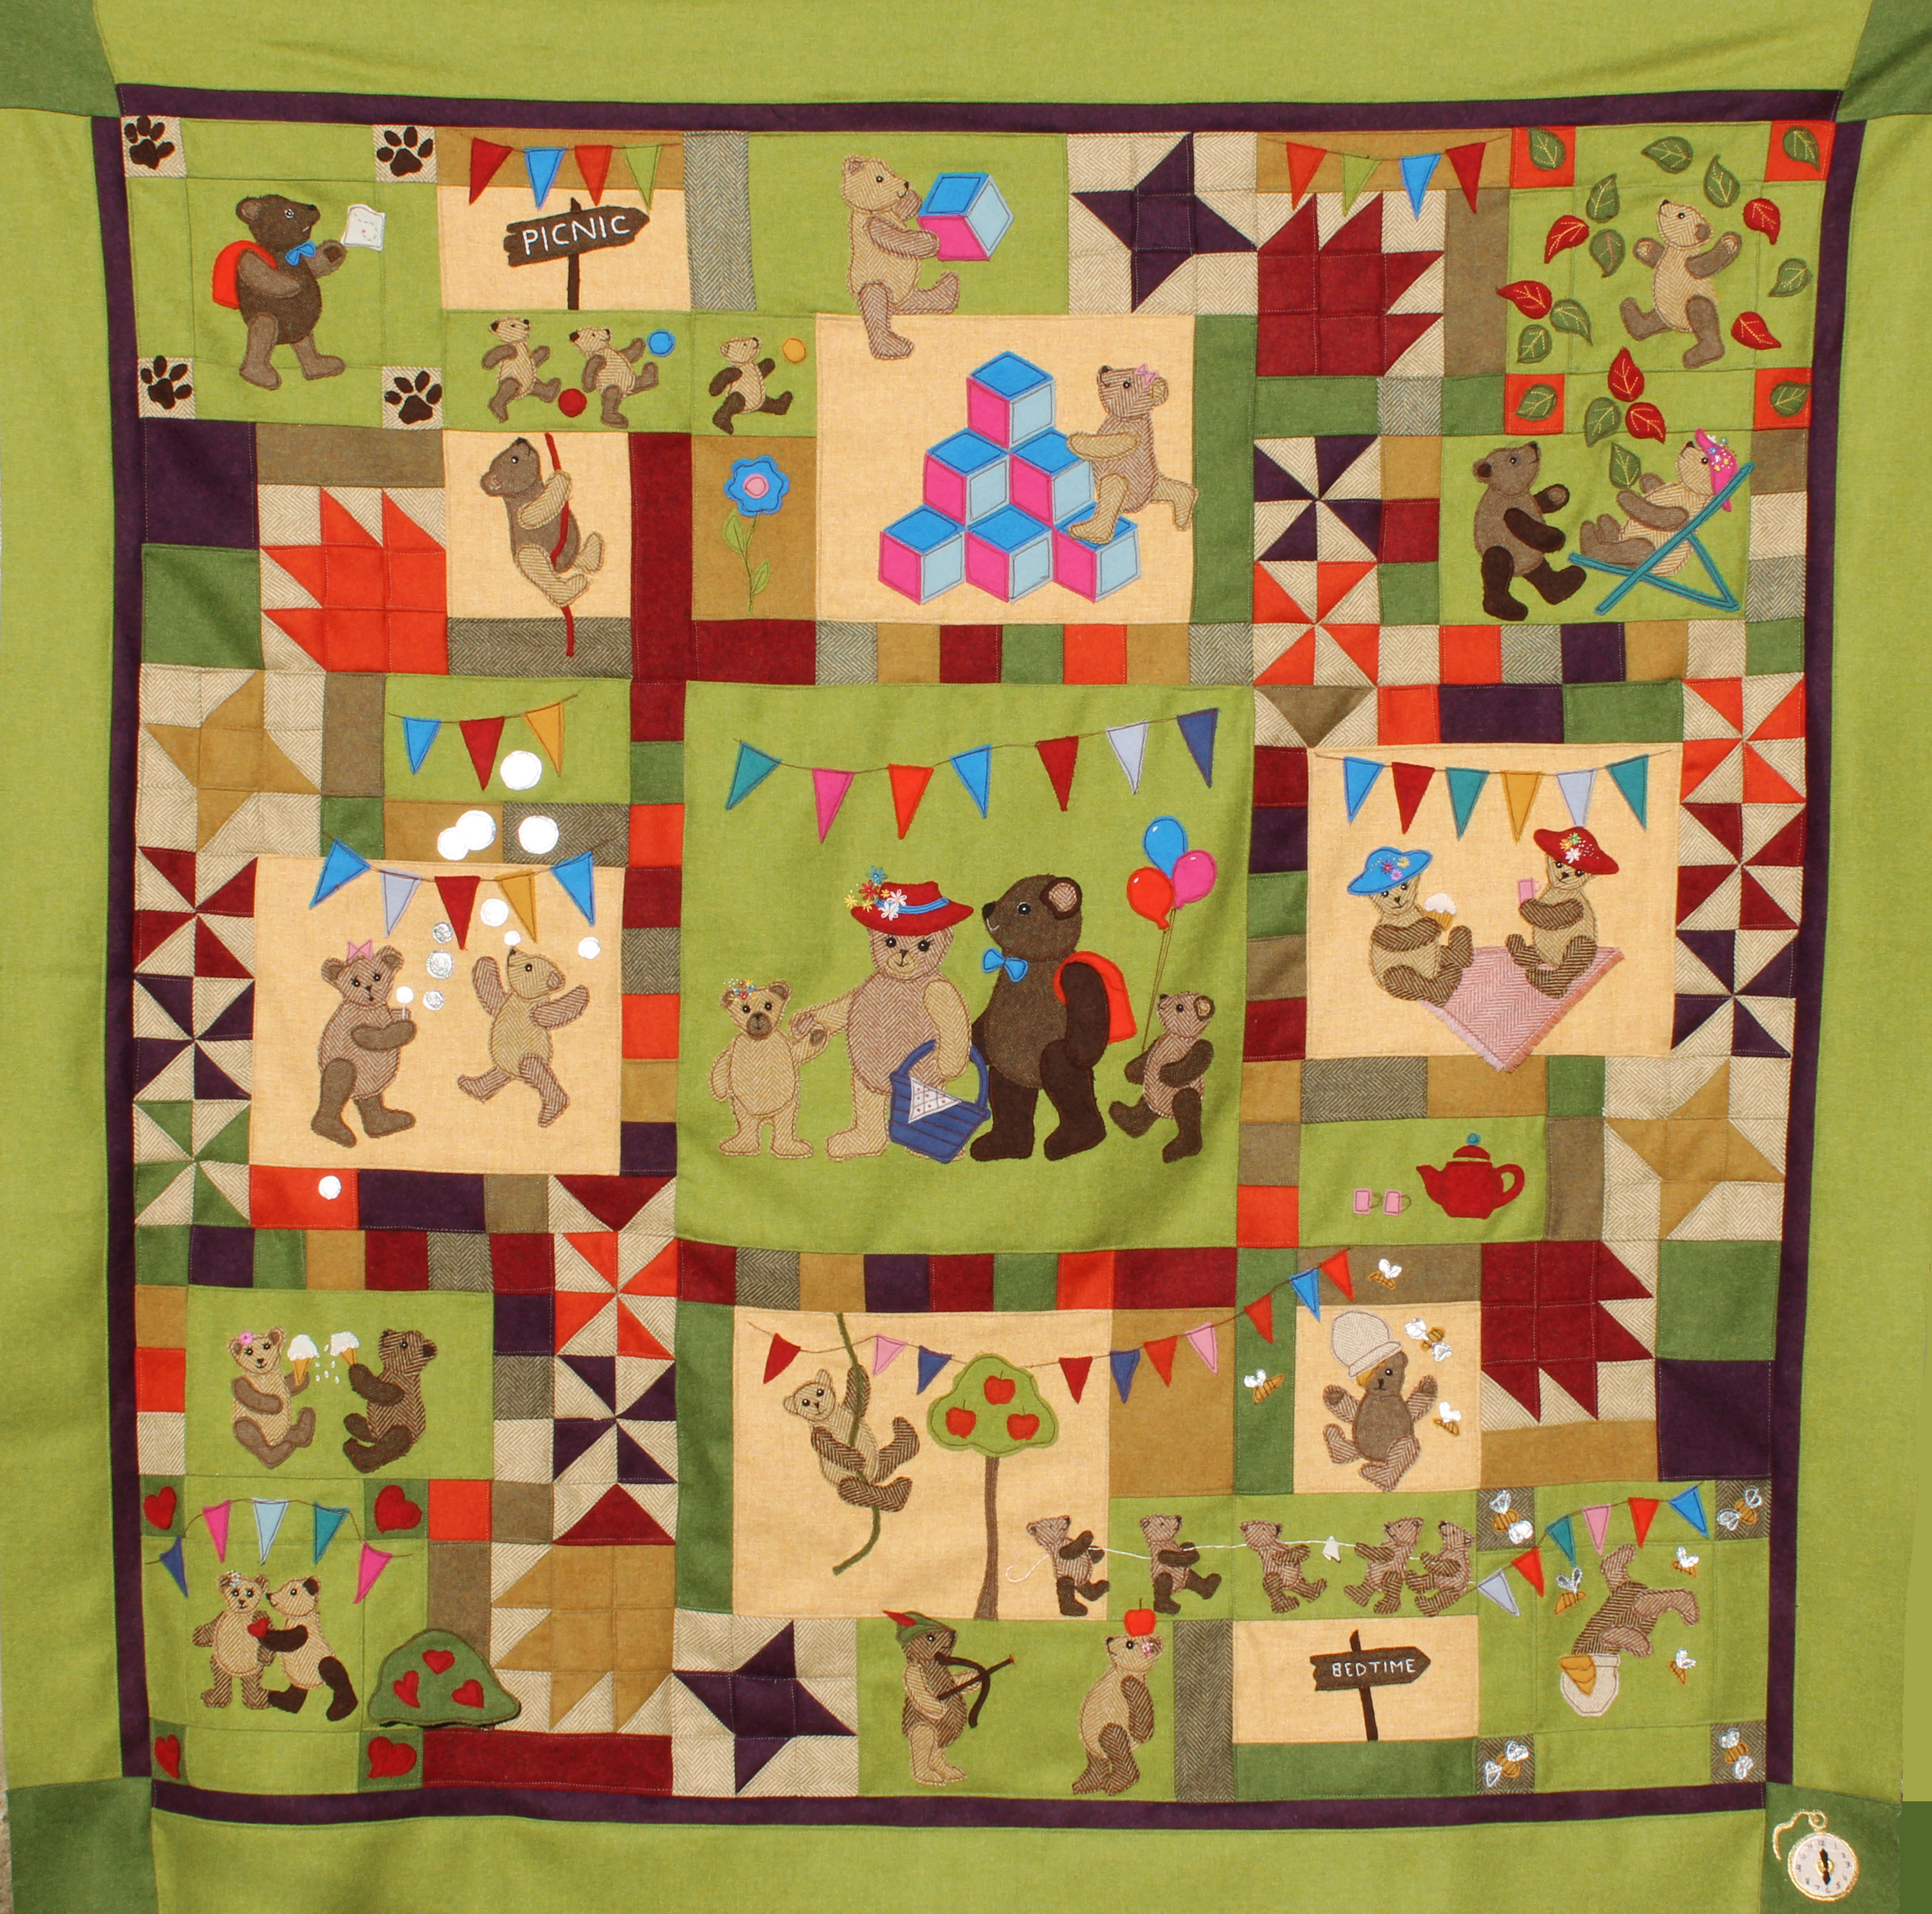 Teddy Bears Picnic Quilt Pattern Book